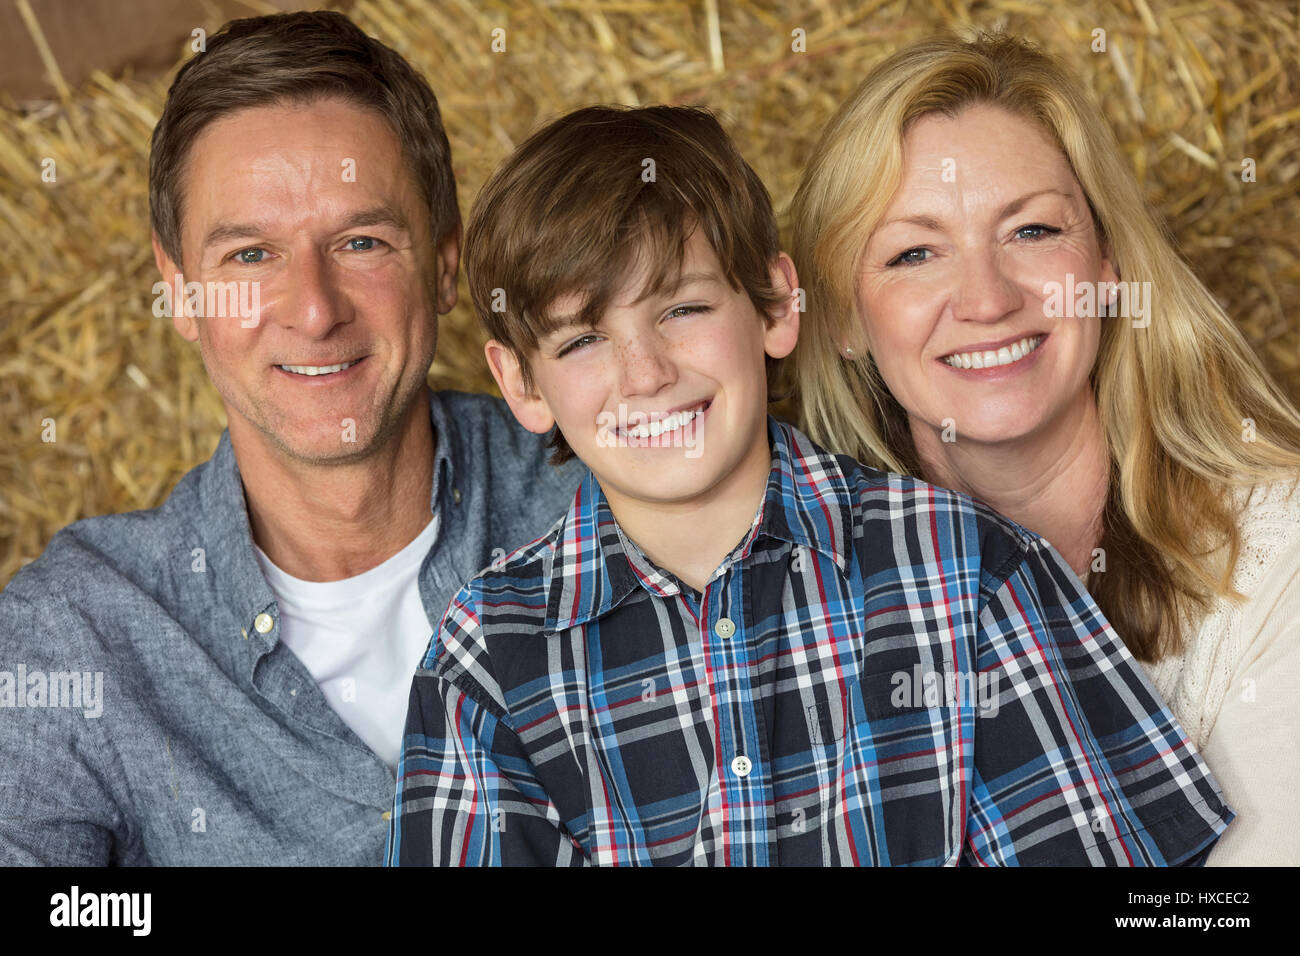 Portrait shot of an attractive, successful and happy family, middle aged man and woman couple with young boy child son sitting smiling together on hay Stock Photo